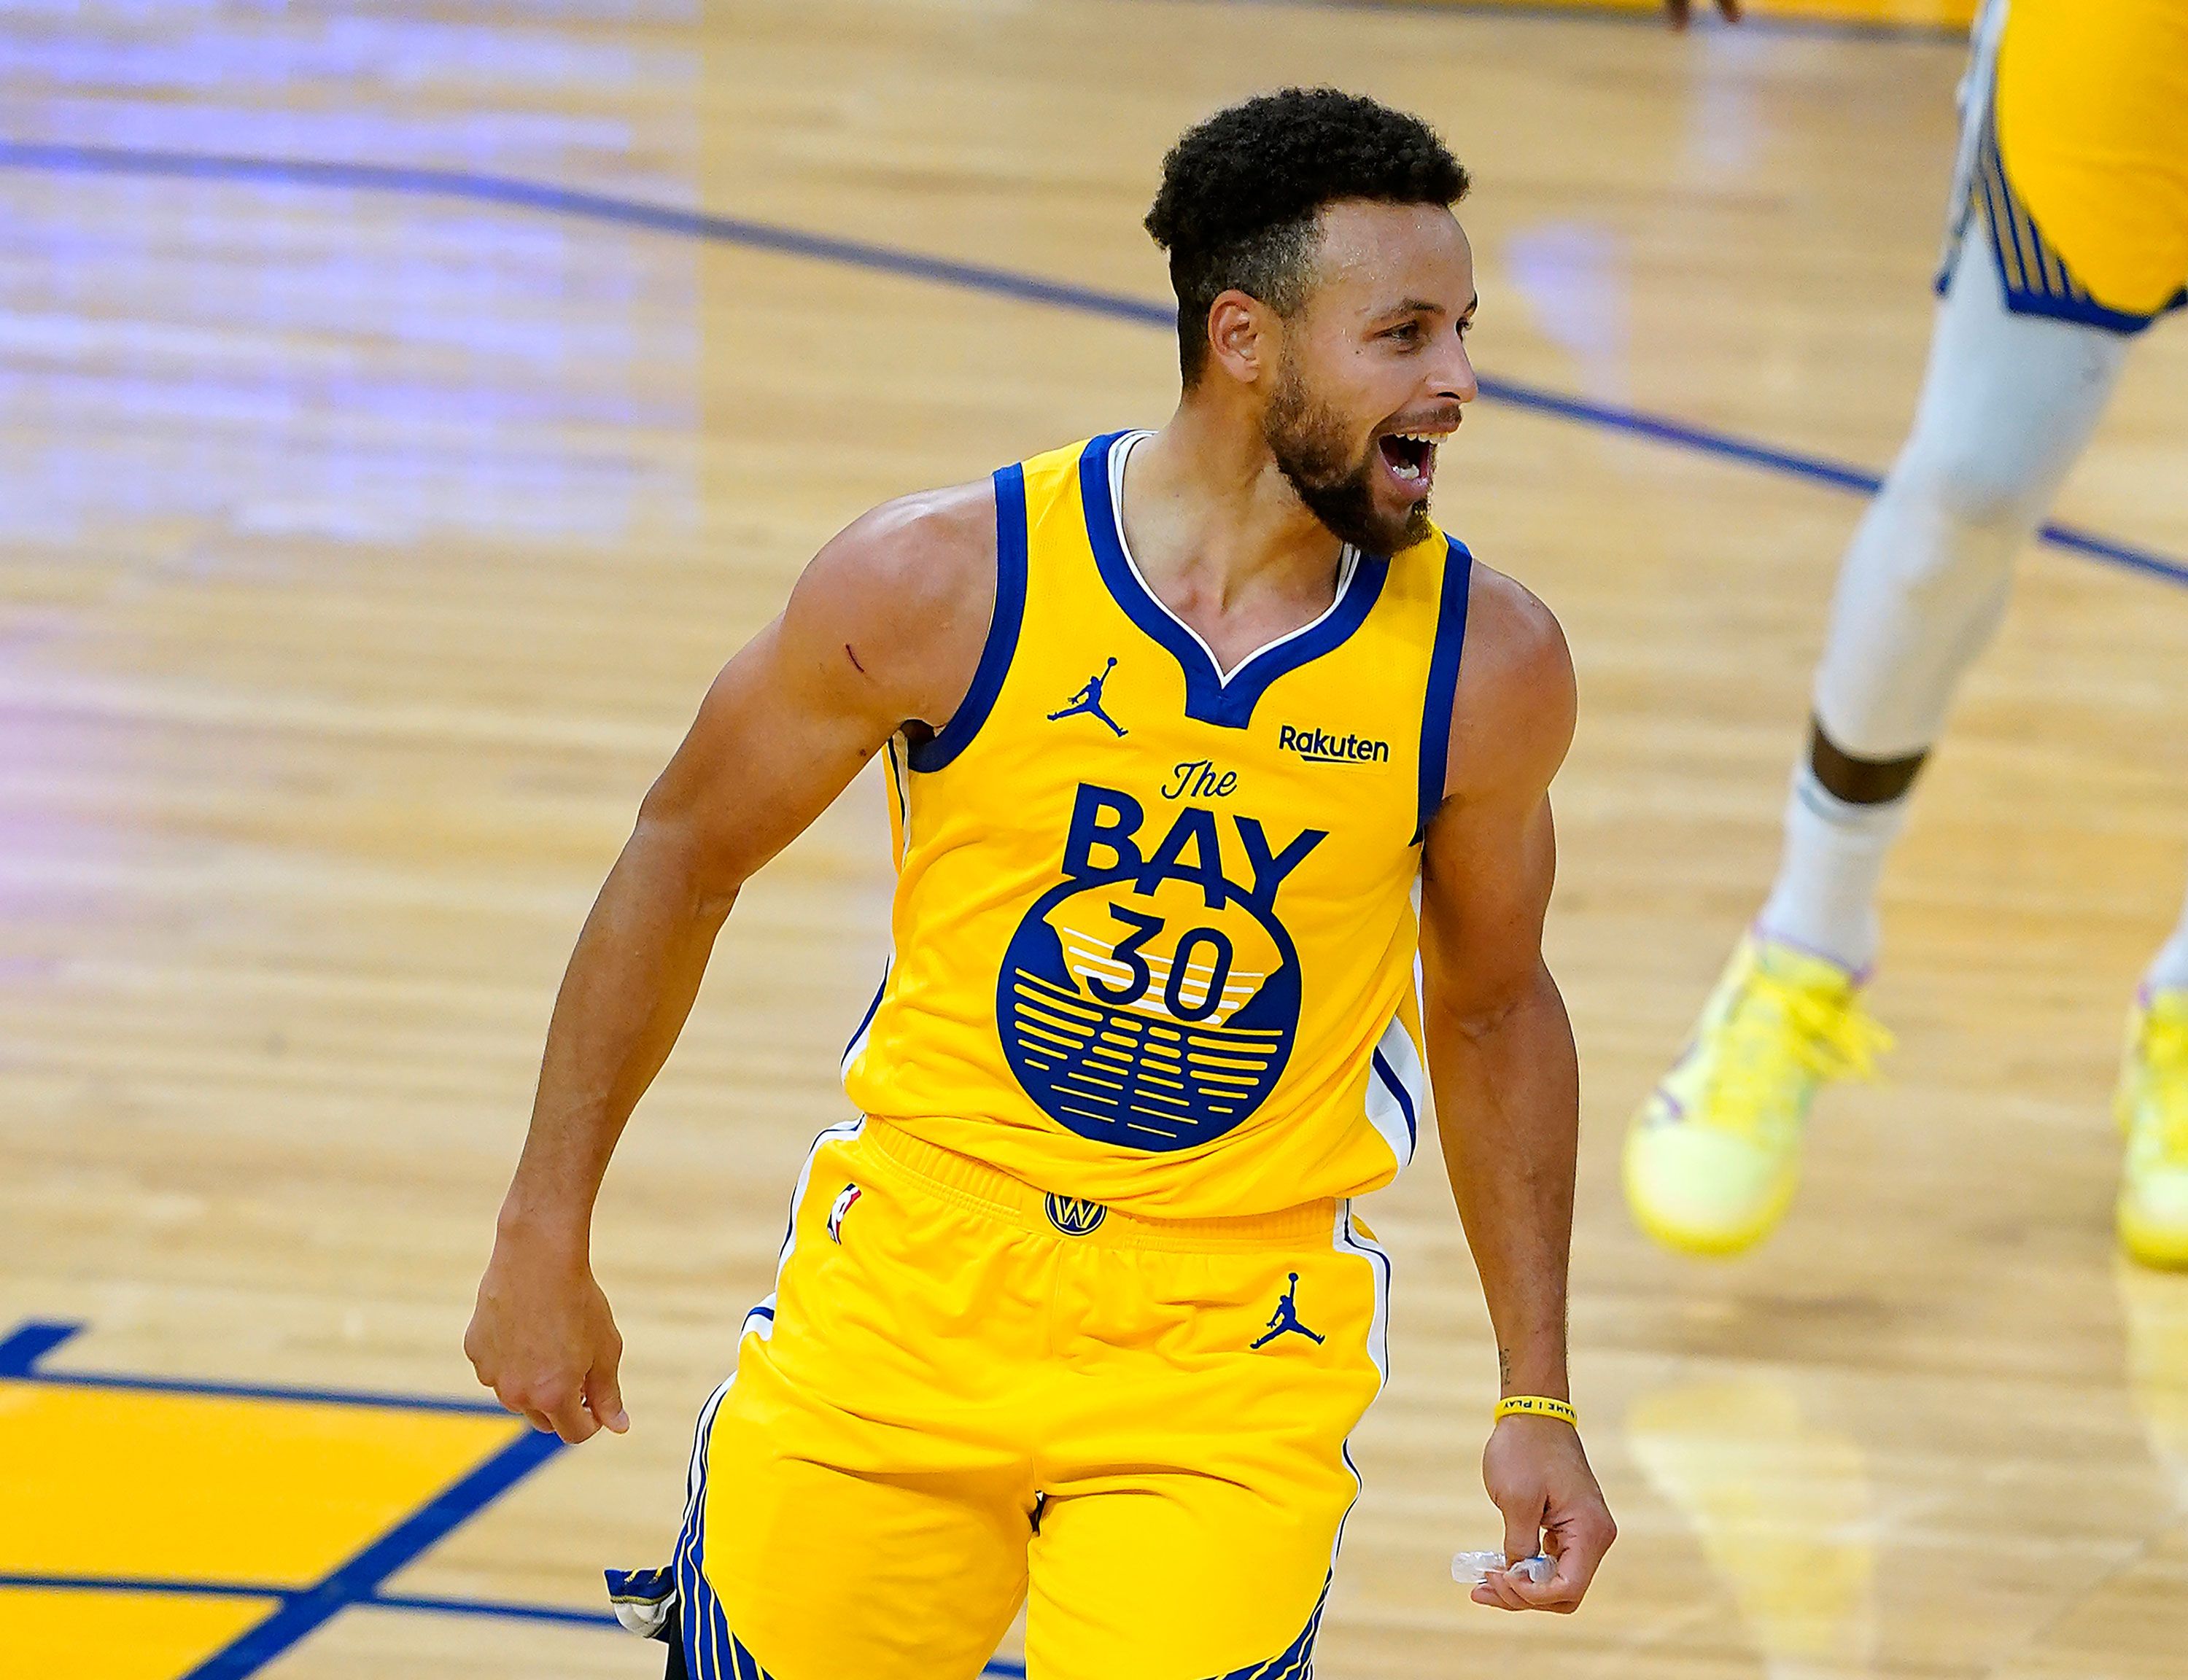 NBA 2021 results, Steph Curry stats: Superstar shoots career high 62  points, Golden State Warriors defeat Portland Trail Blazers